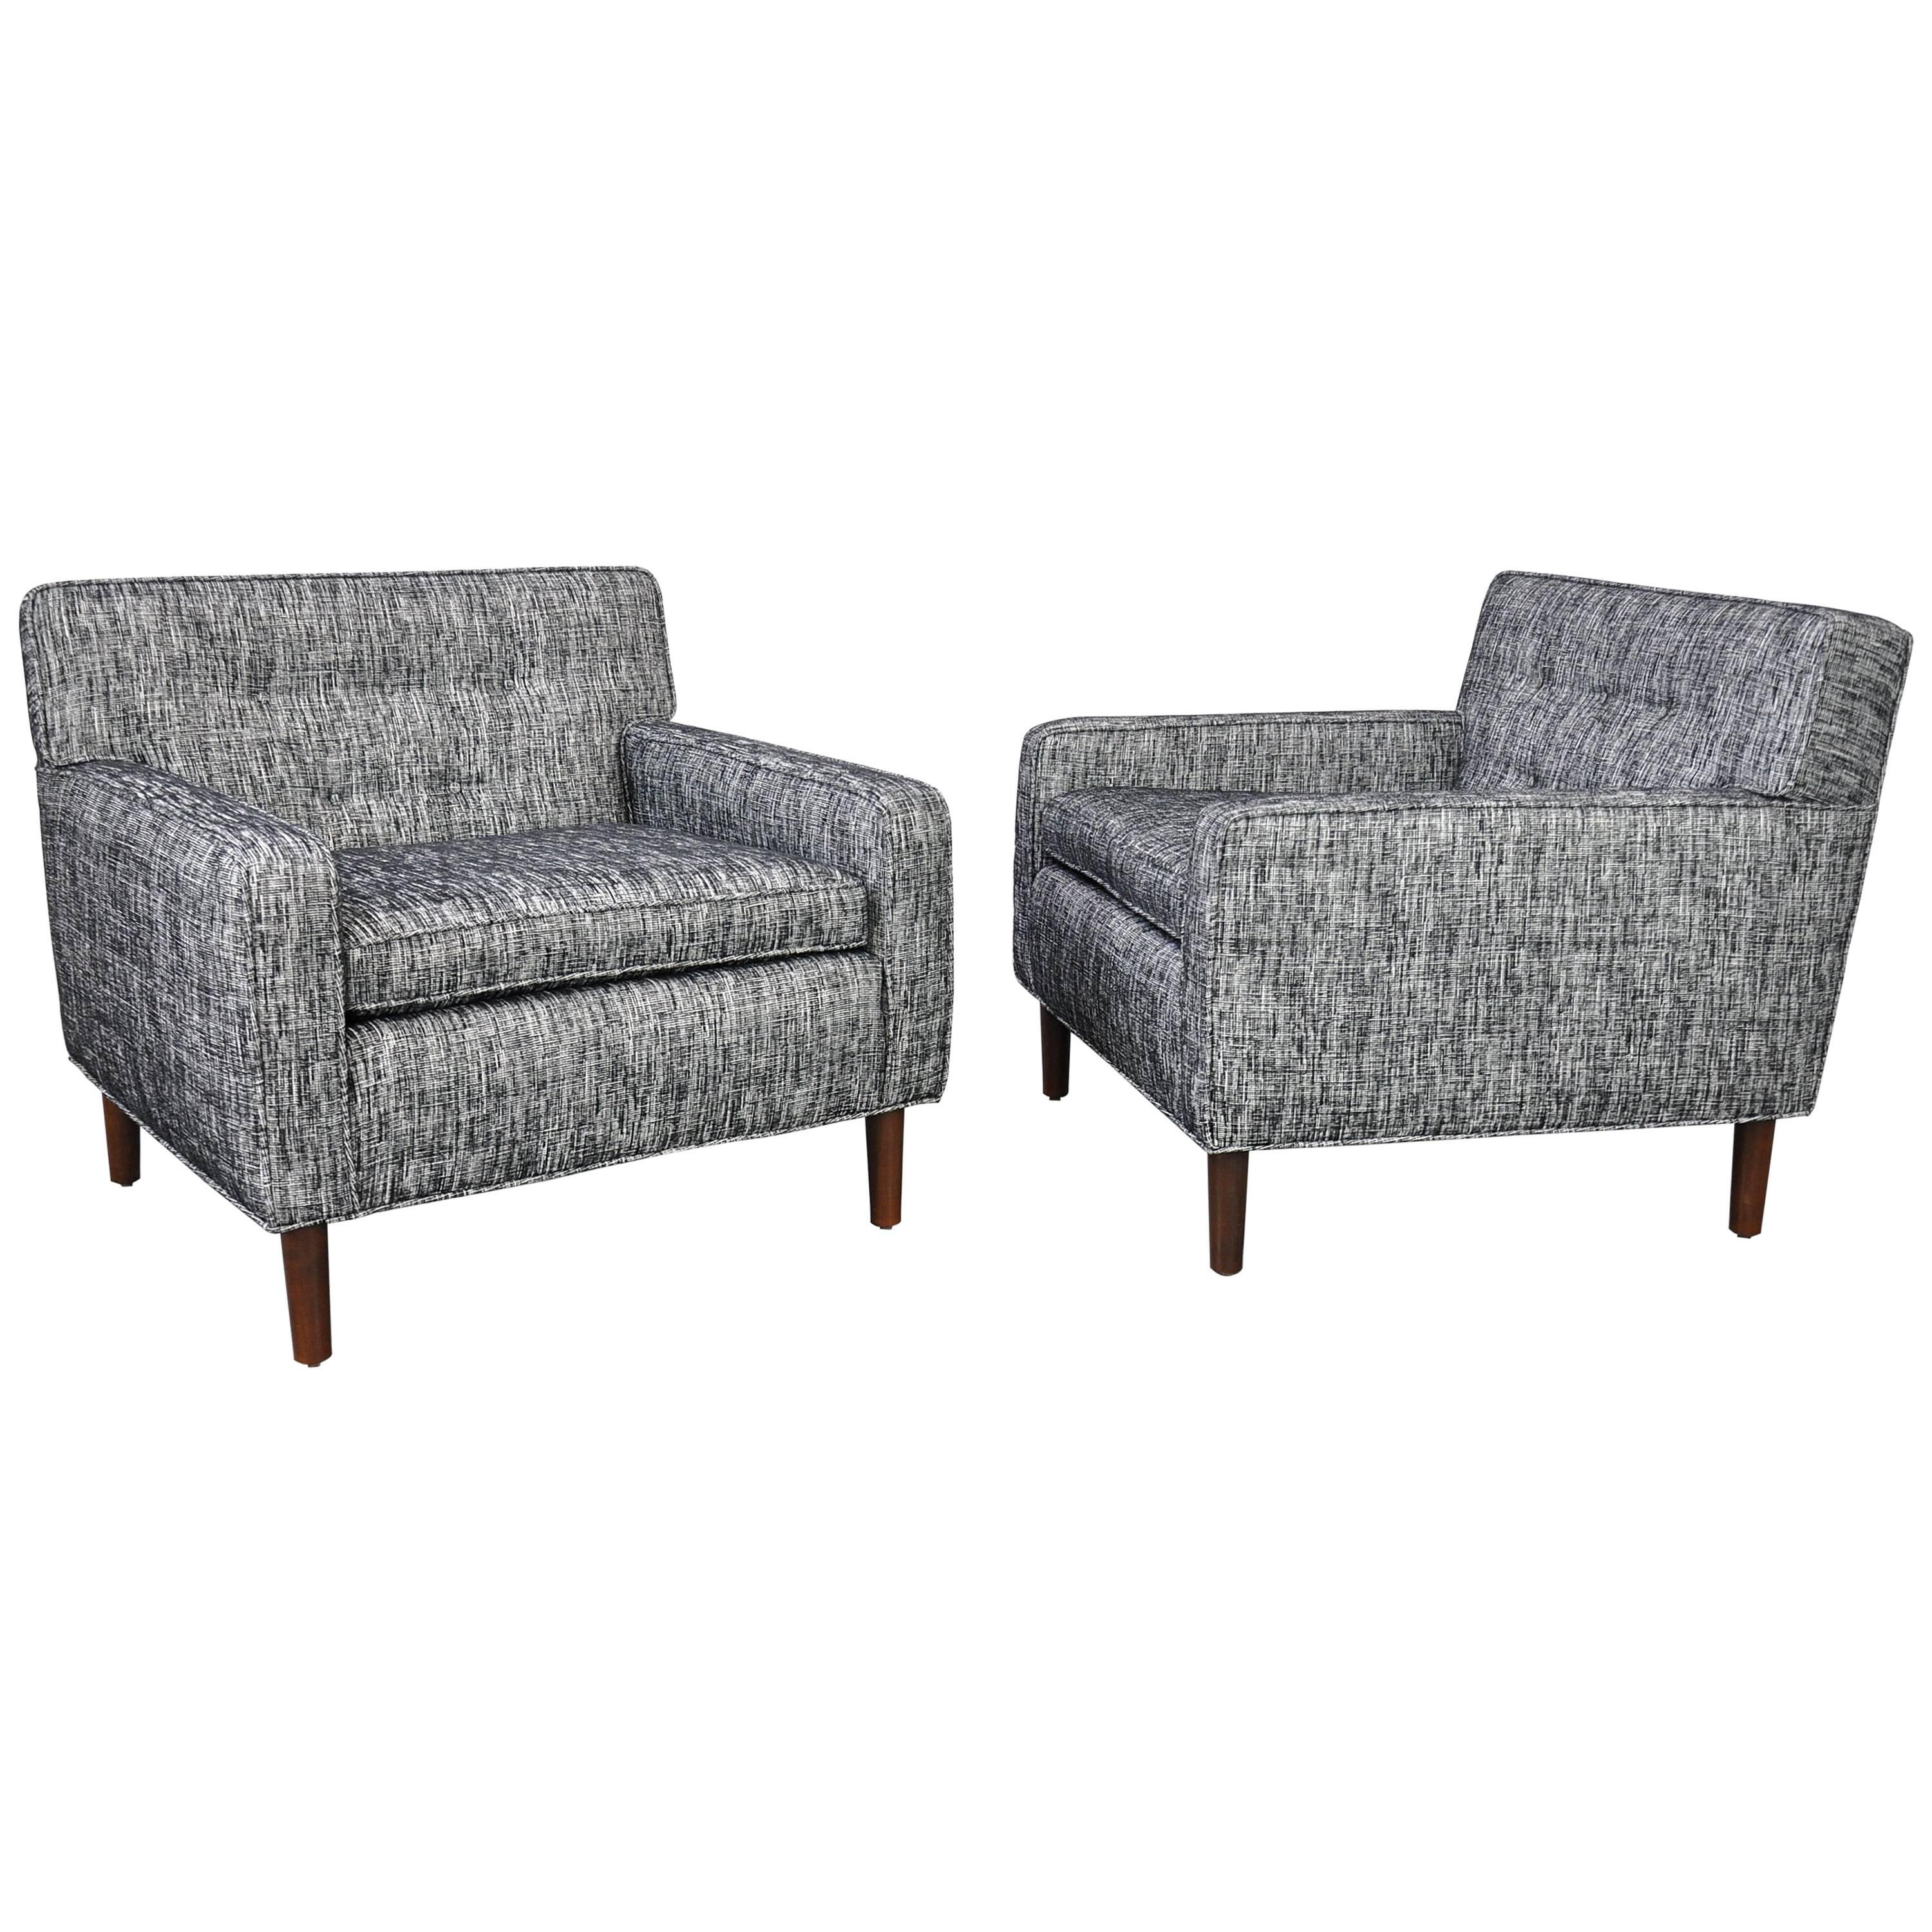 Pair of Edward Wormley for Dunbar Tufted Lounge Chairs